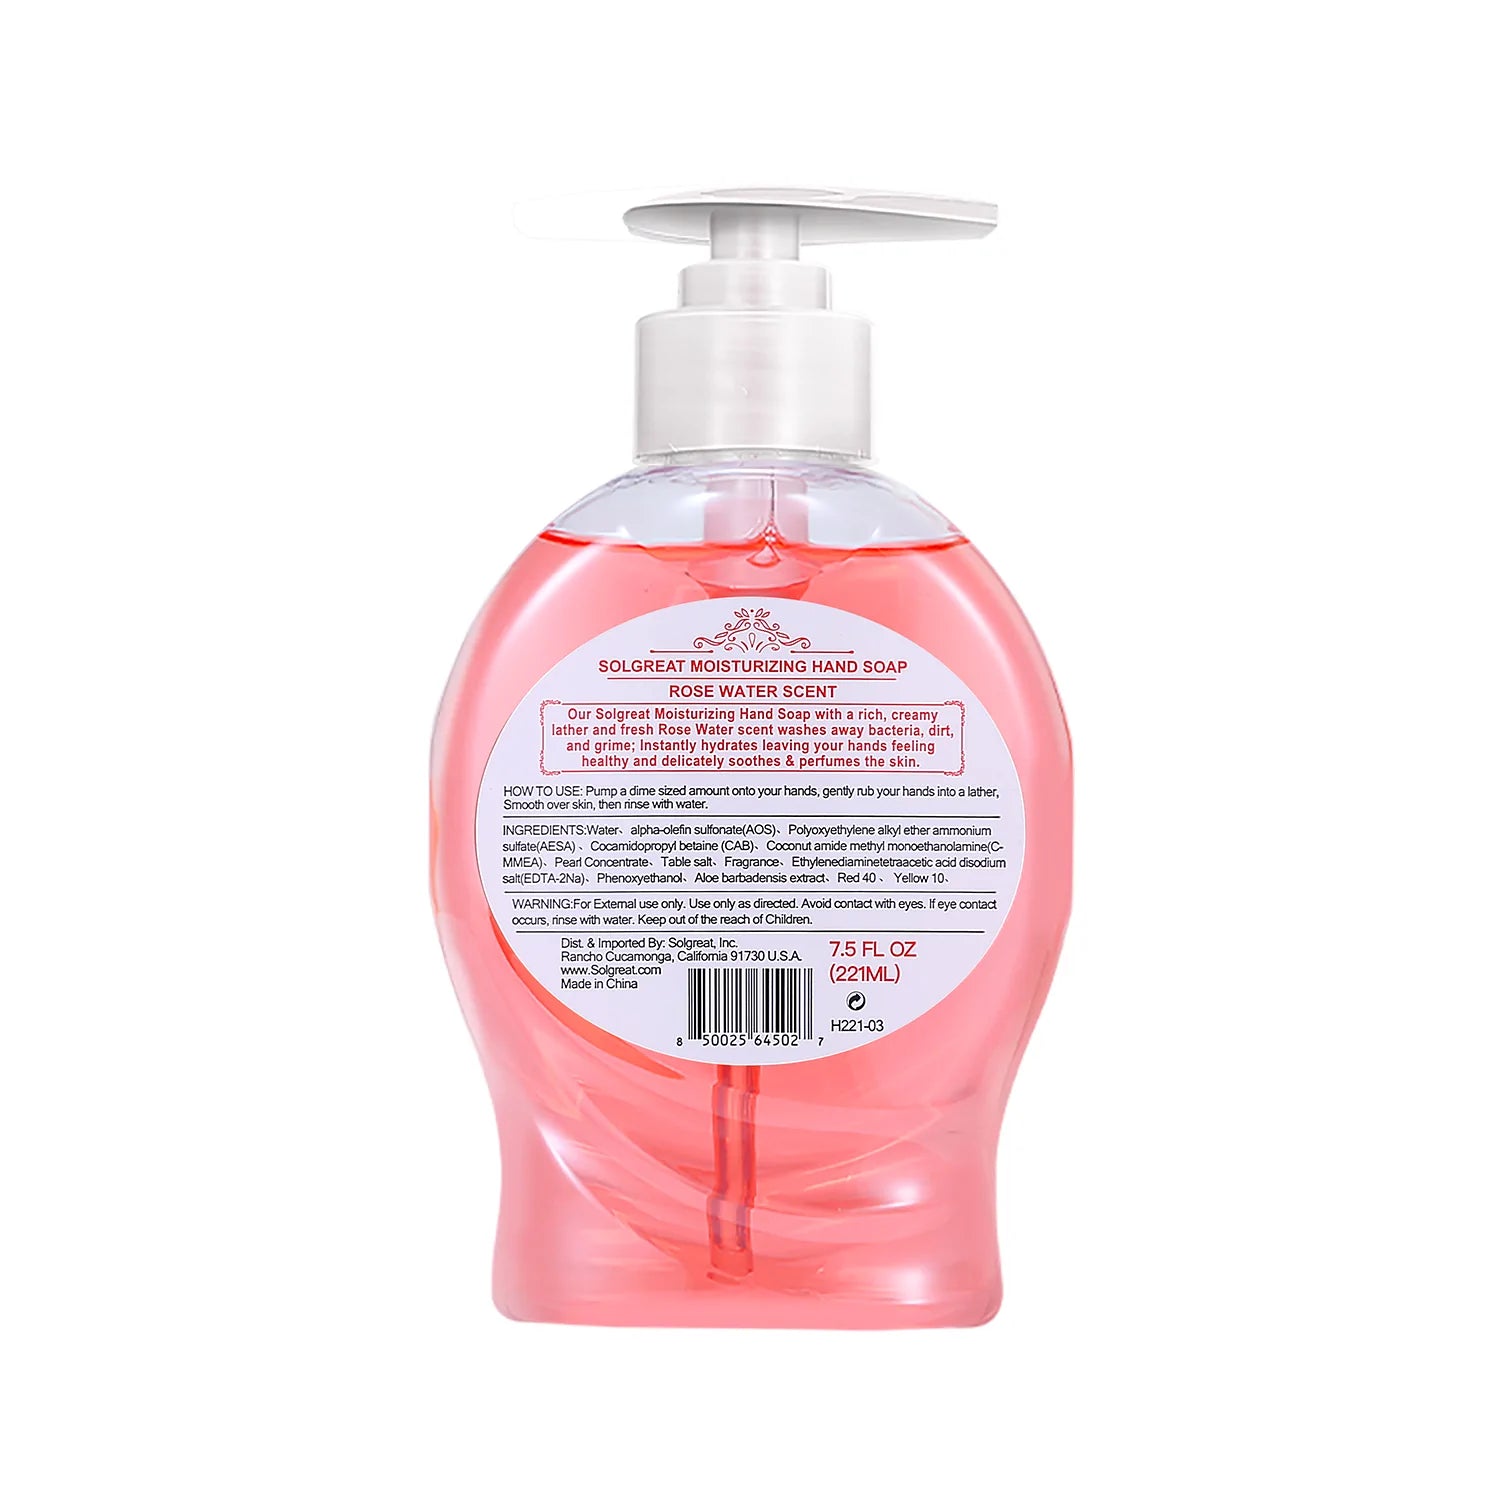 Solgreat MOISTURIZING HAND SOAP - ROSE WATER SCENT